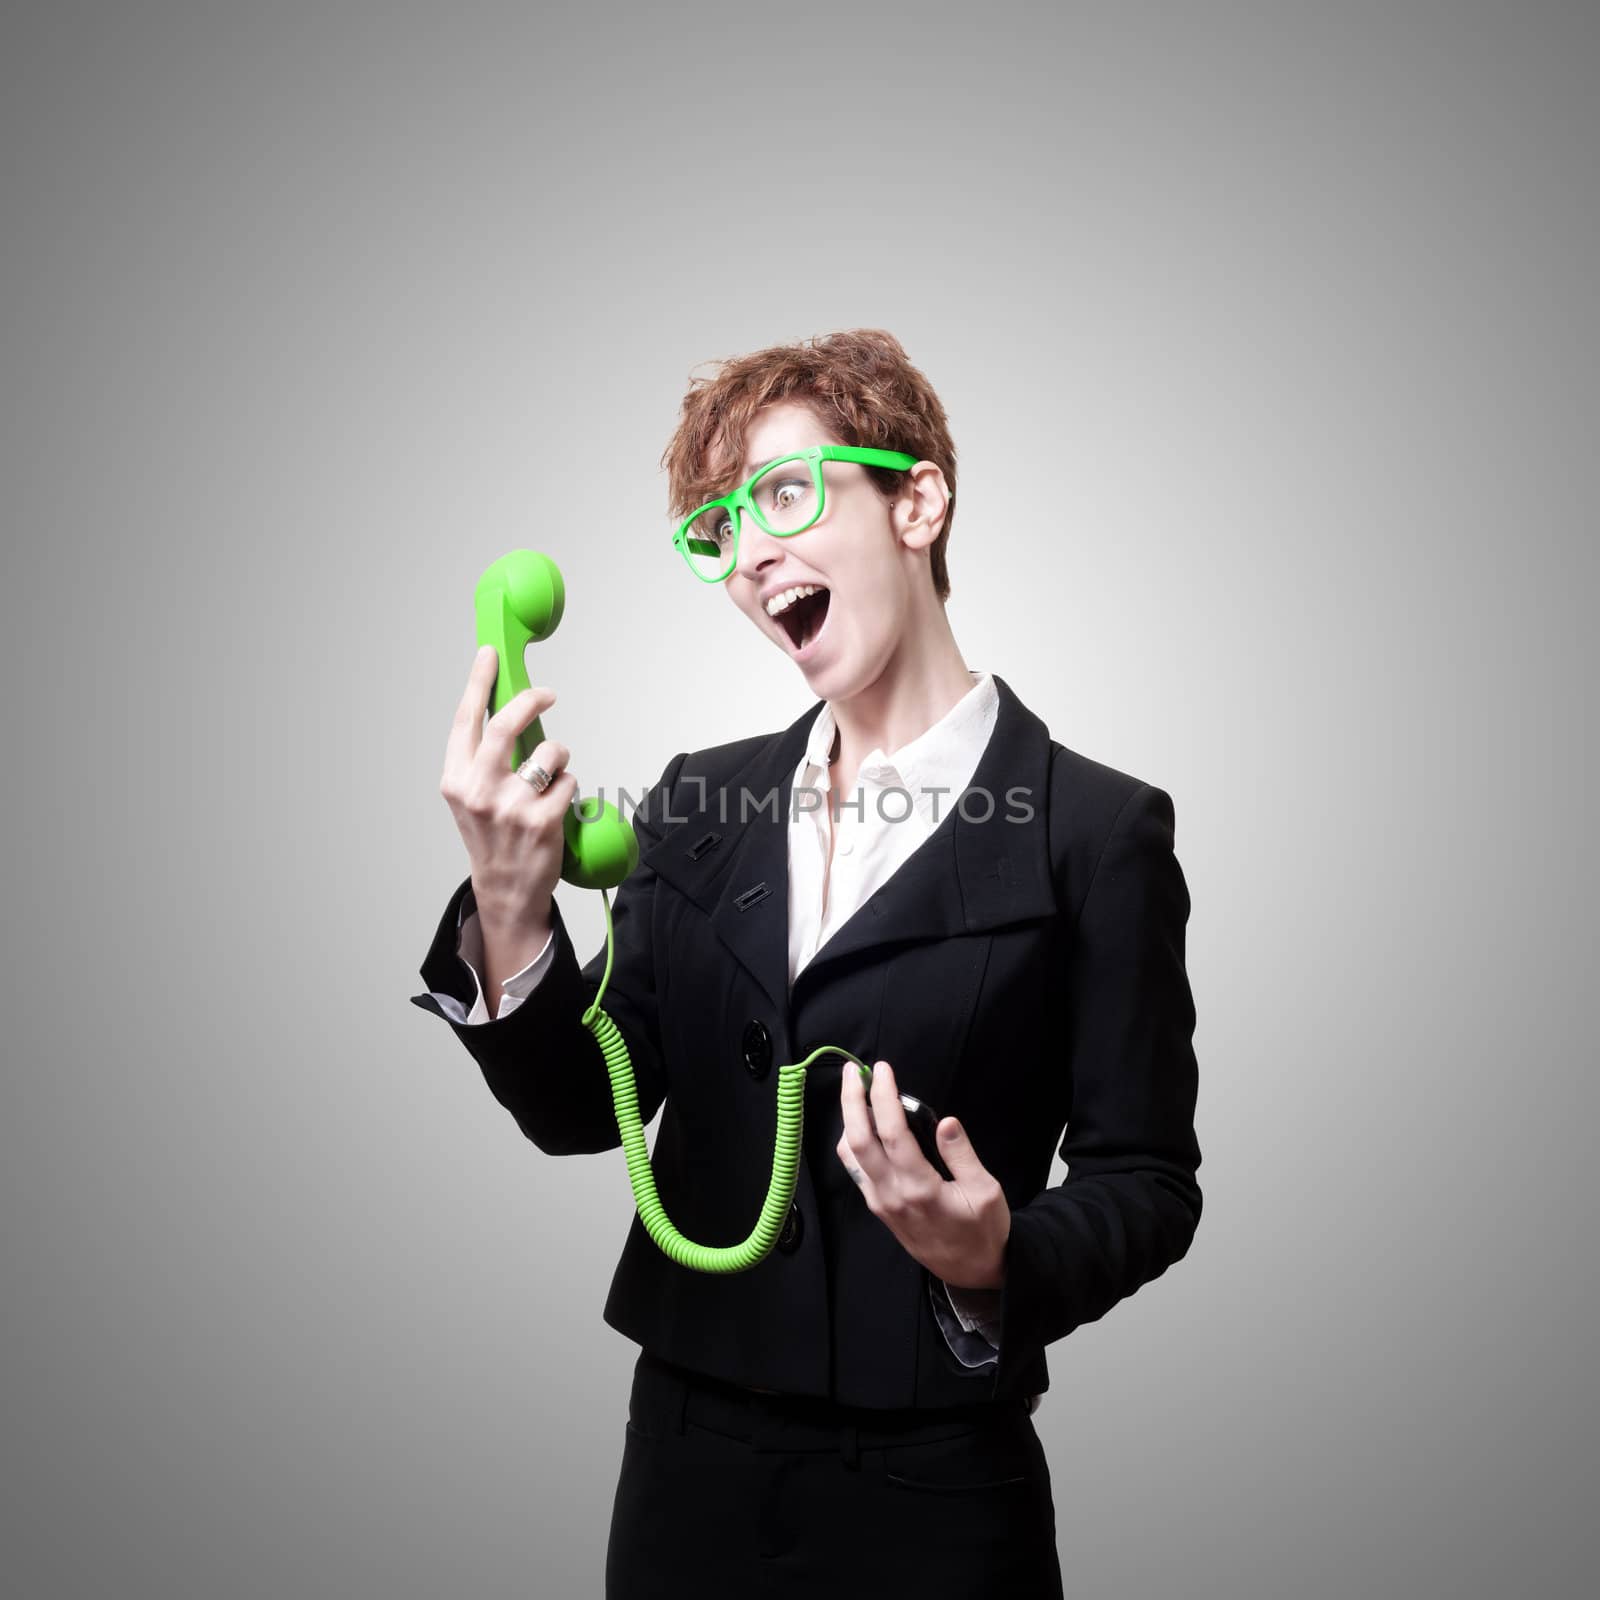 business woman with phone on gray background